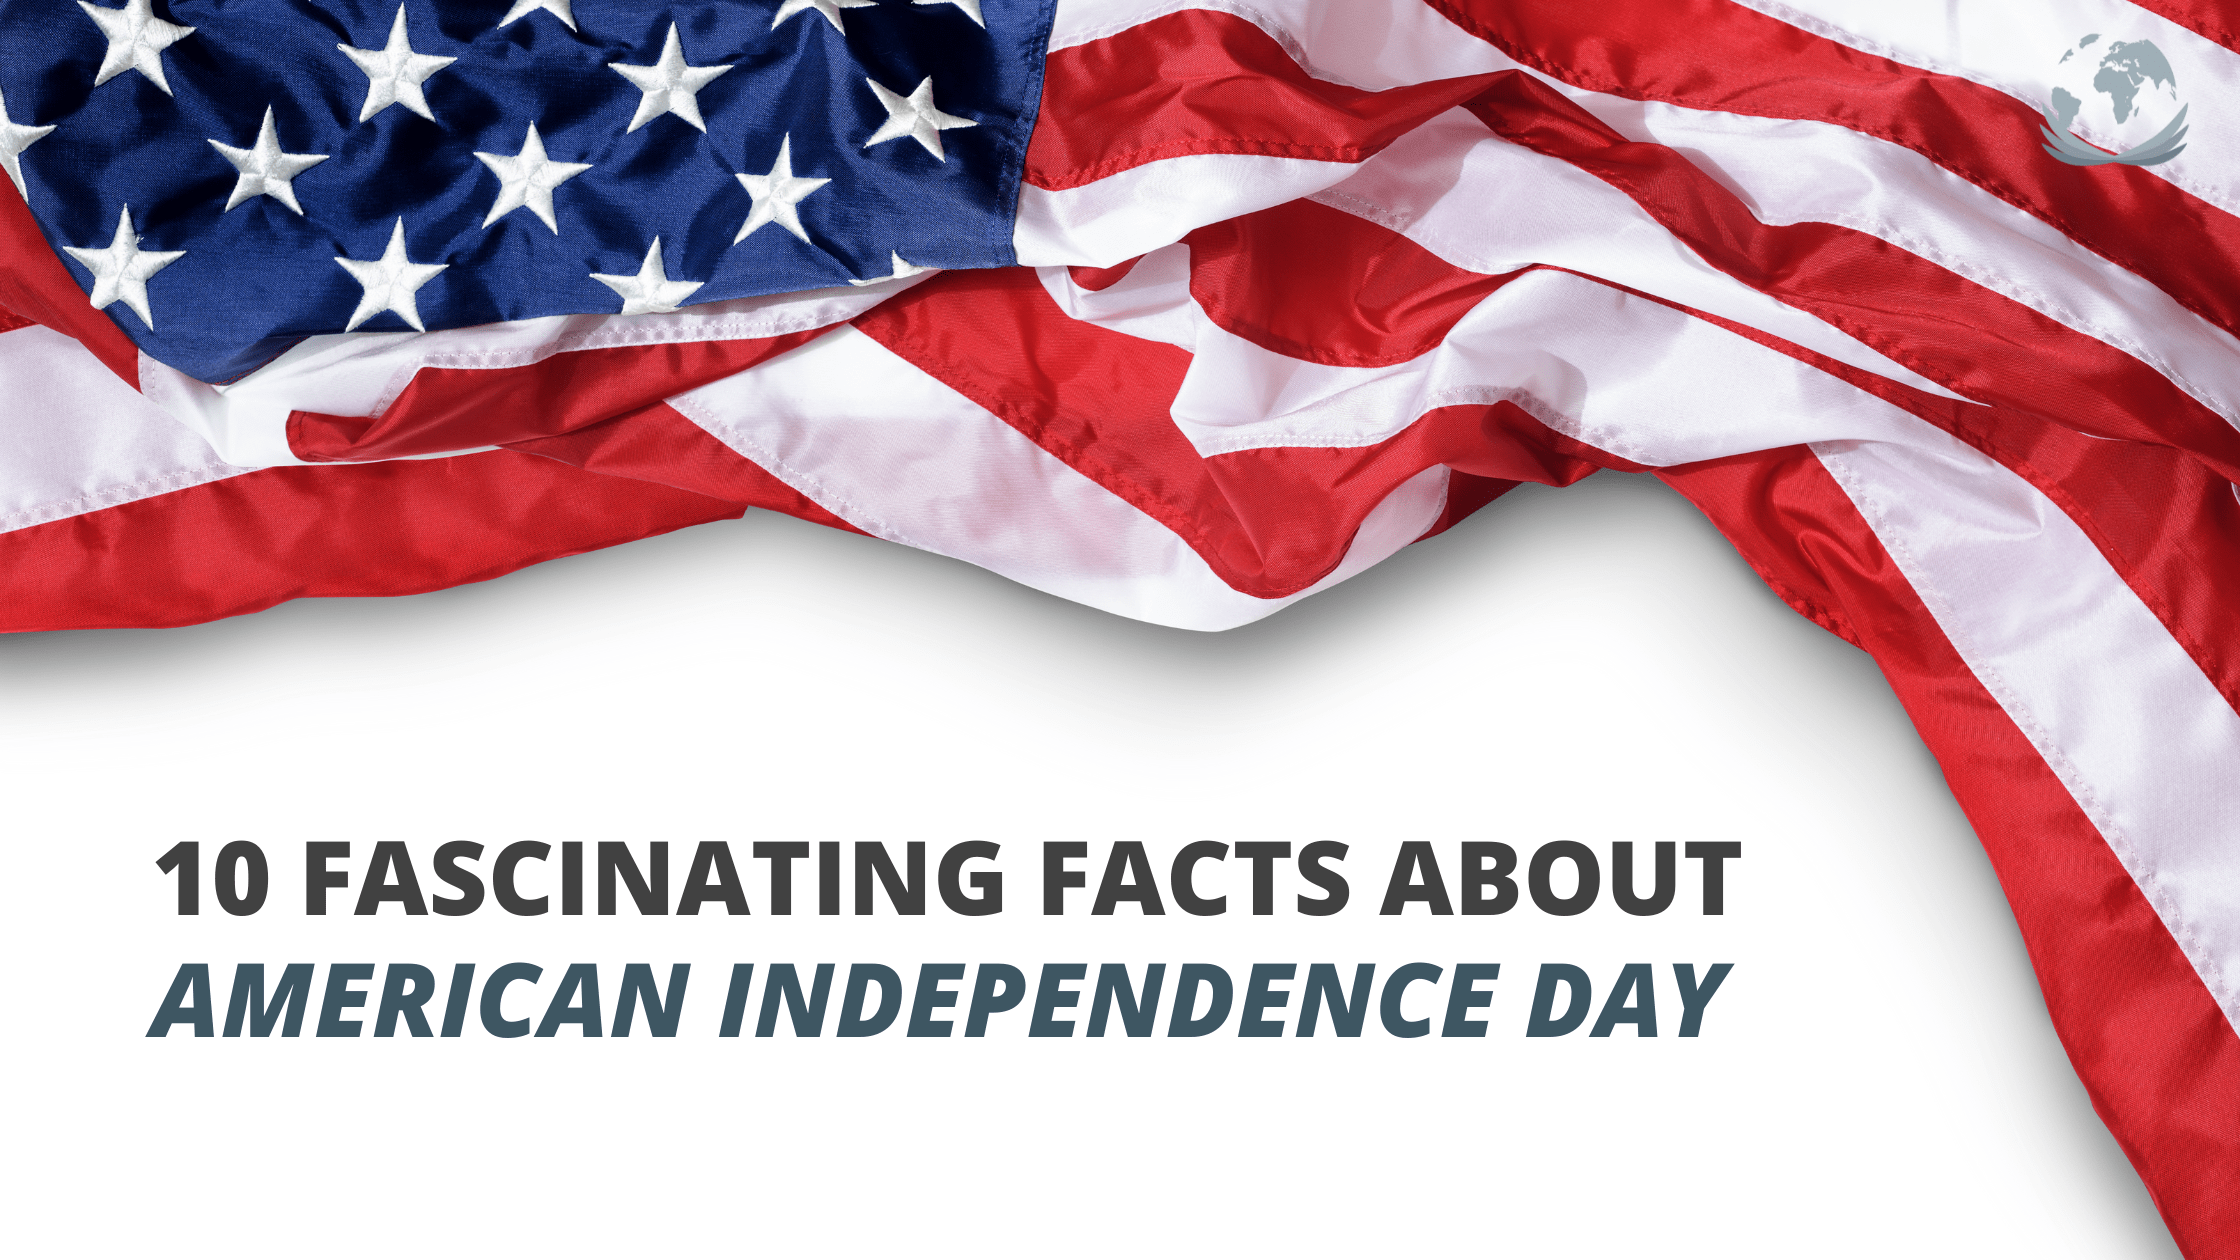 Facts About American Independence Day